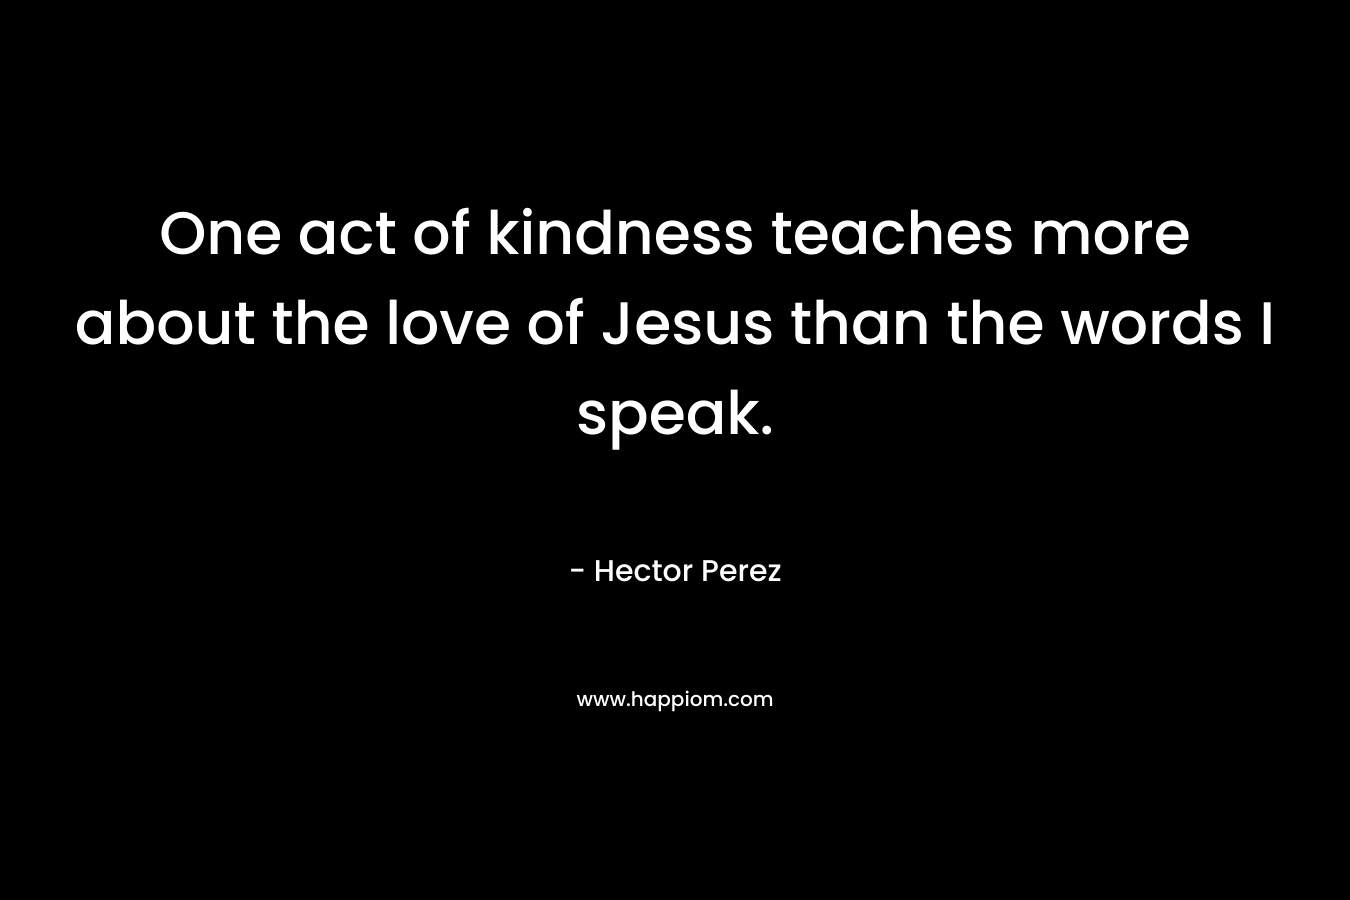 One act of kindness teaches more about the love of Jesus than the words I speak.